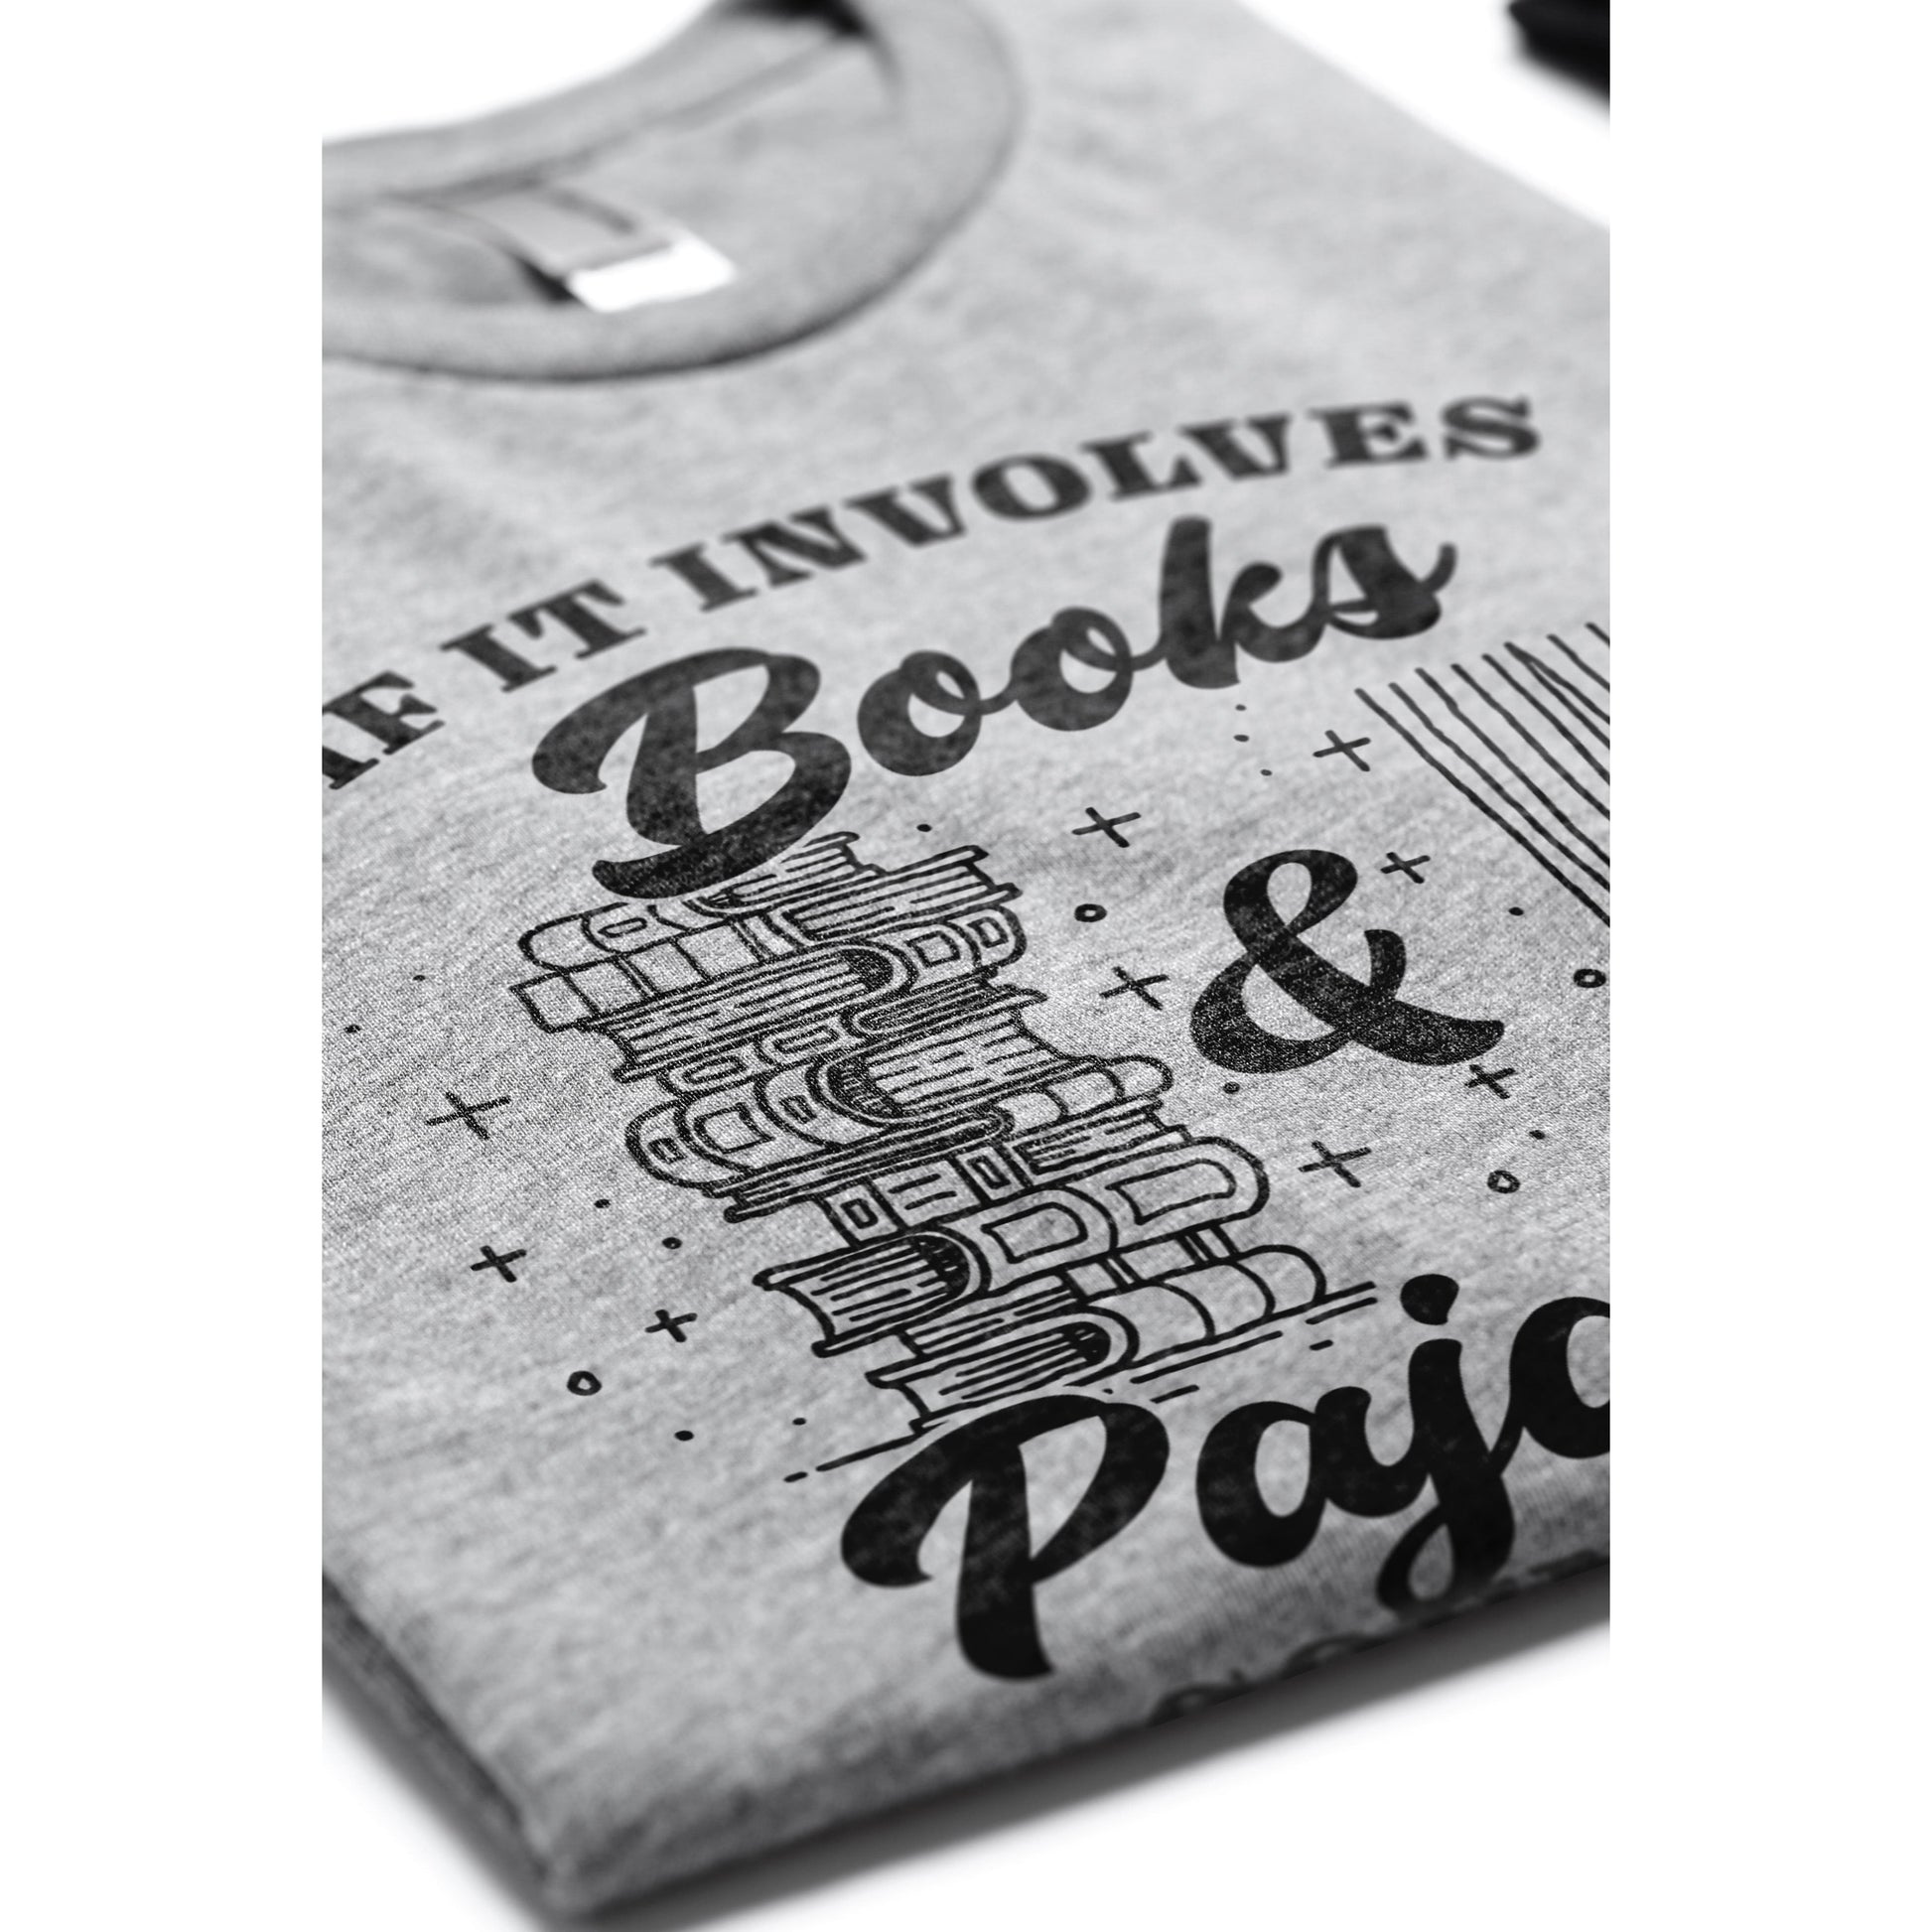 If It Involves Books And Pajamas Count Me In (Refer To Our Other If It Involves Designs On Our Site) - threadtank | stories you can wear